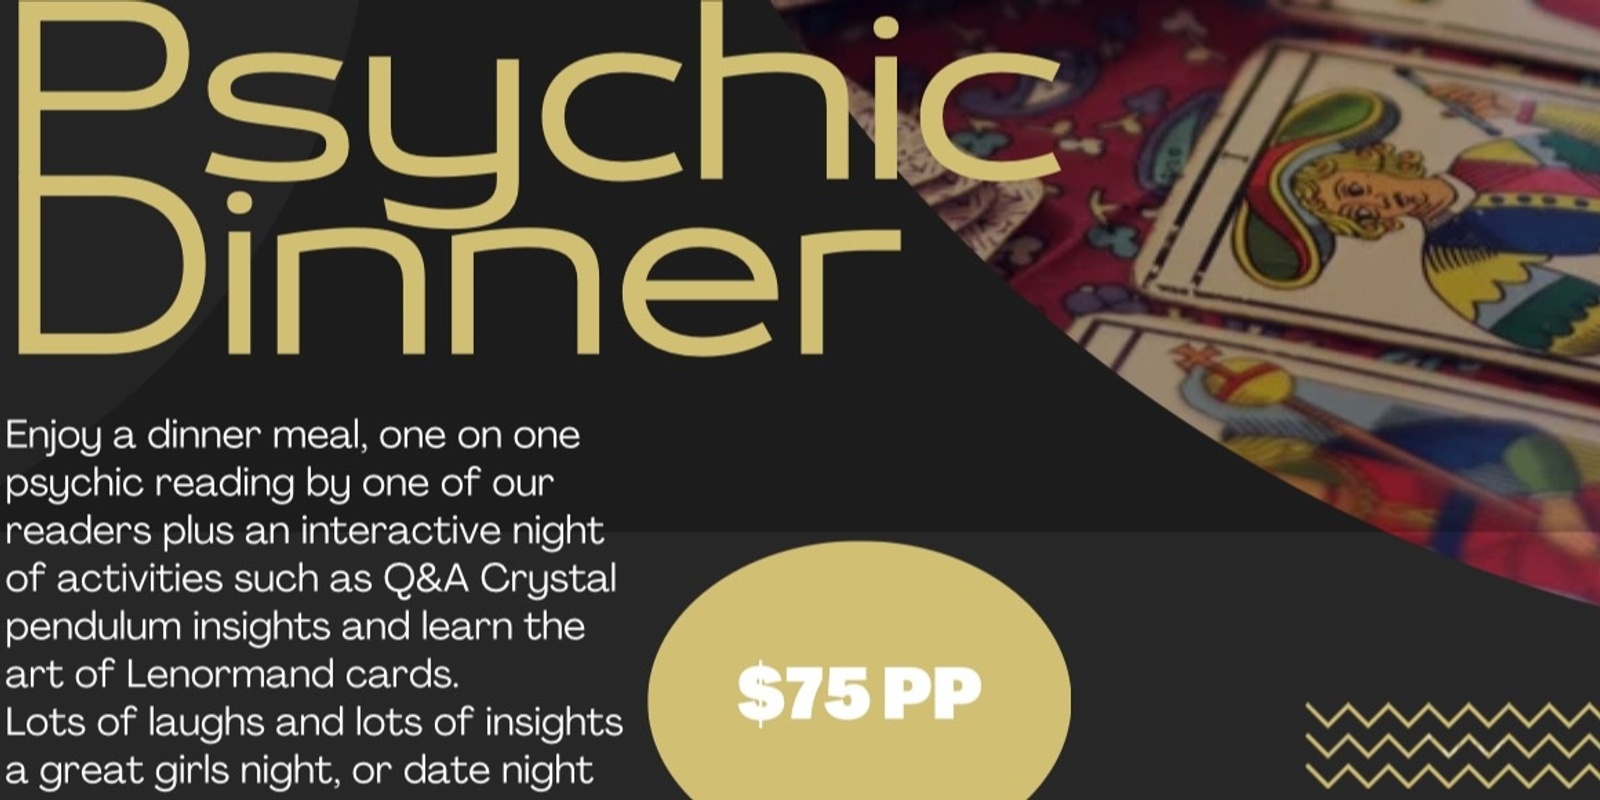 Banner image for Psychic Dinner @Seaford Hotel 5th Aug 